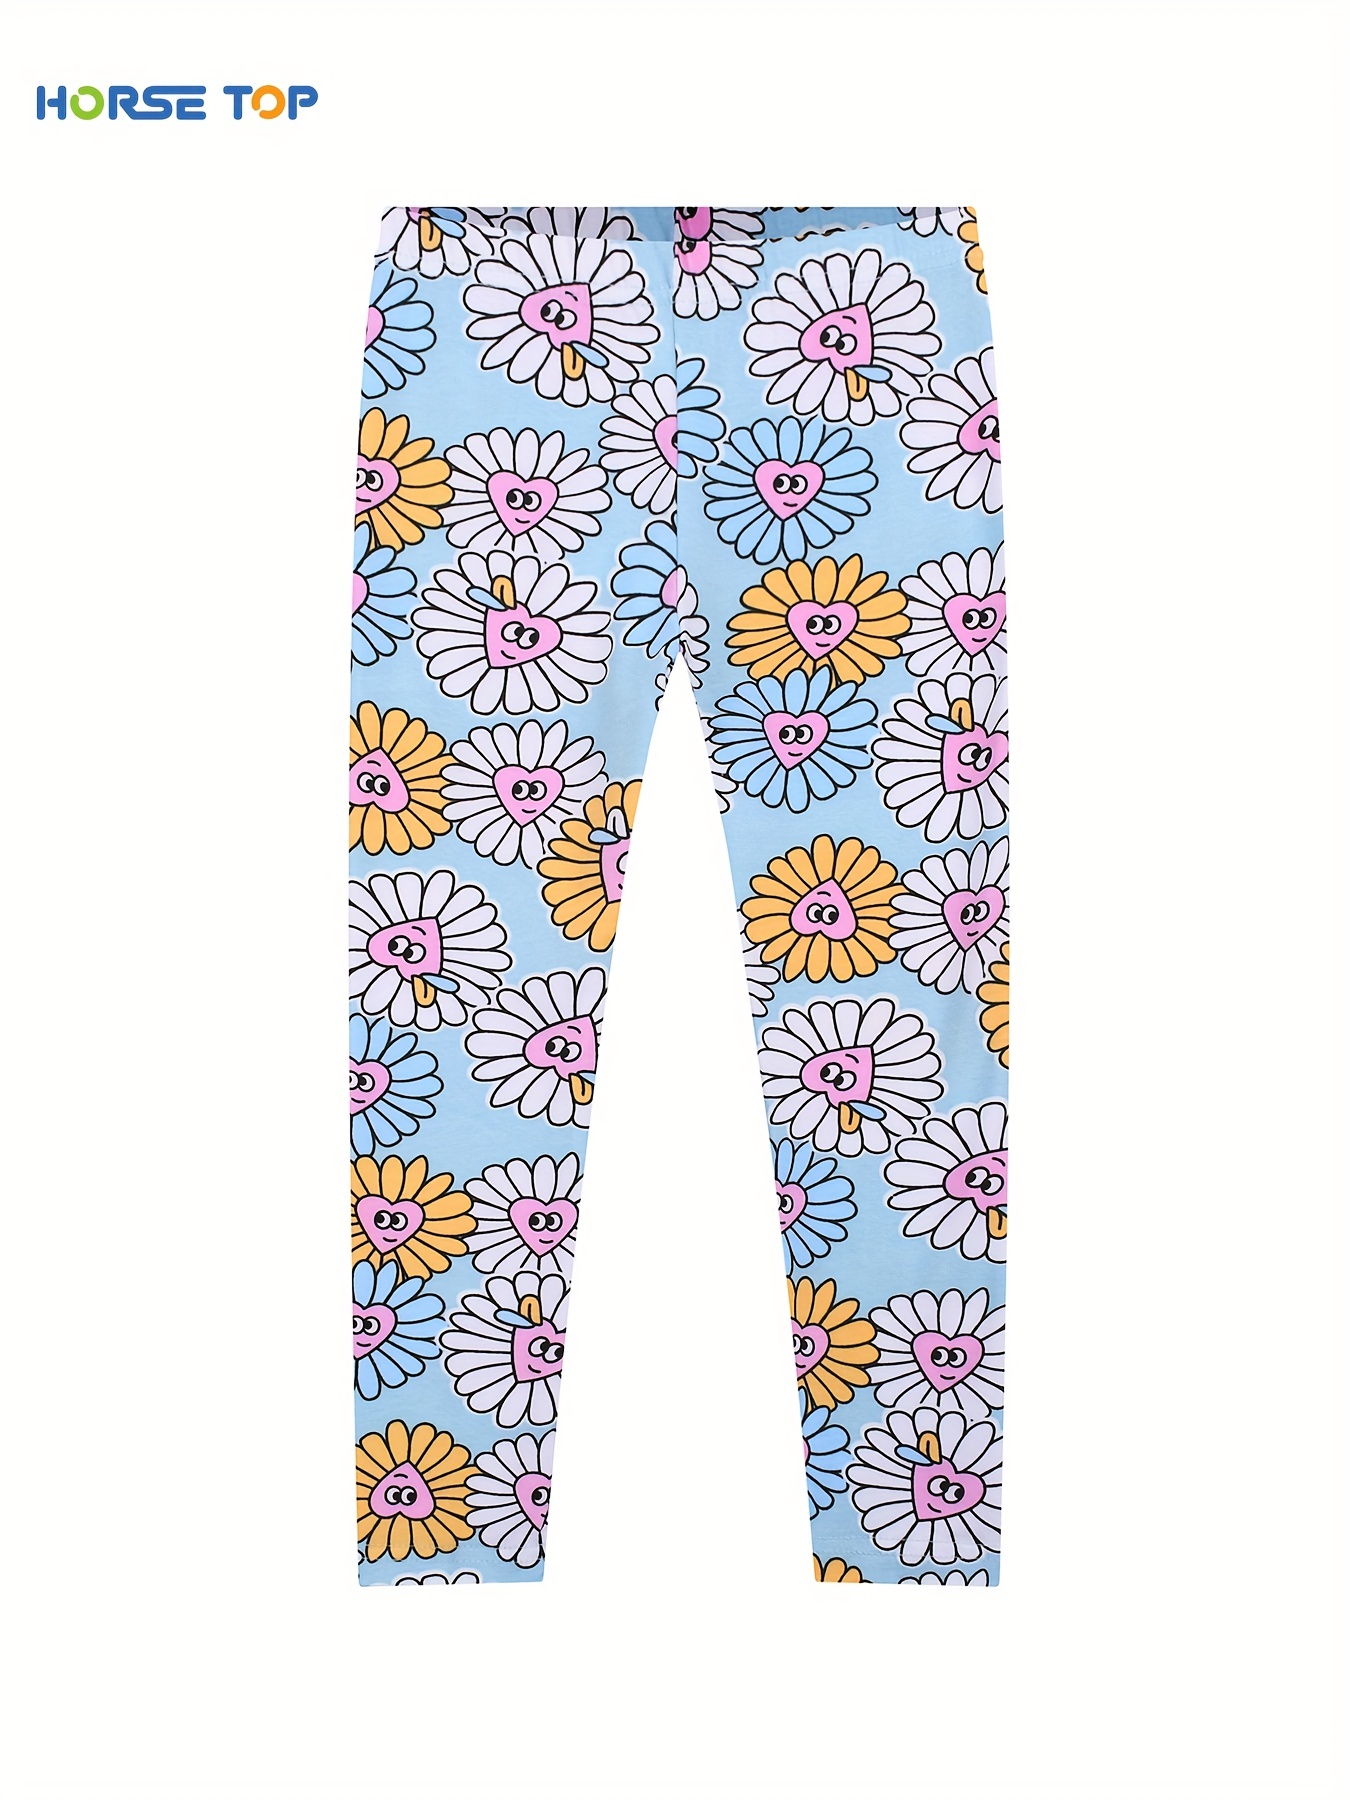 Small Daisy Print Flare Leg Pants, Vacation Pants For Spring & Summer,  Women's Clothing